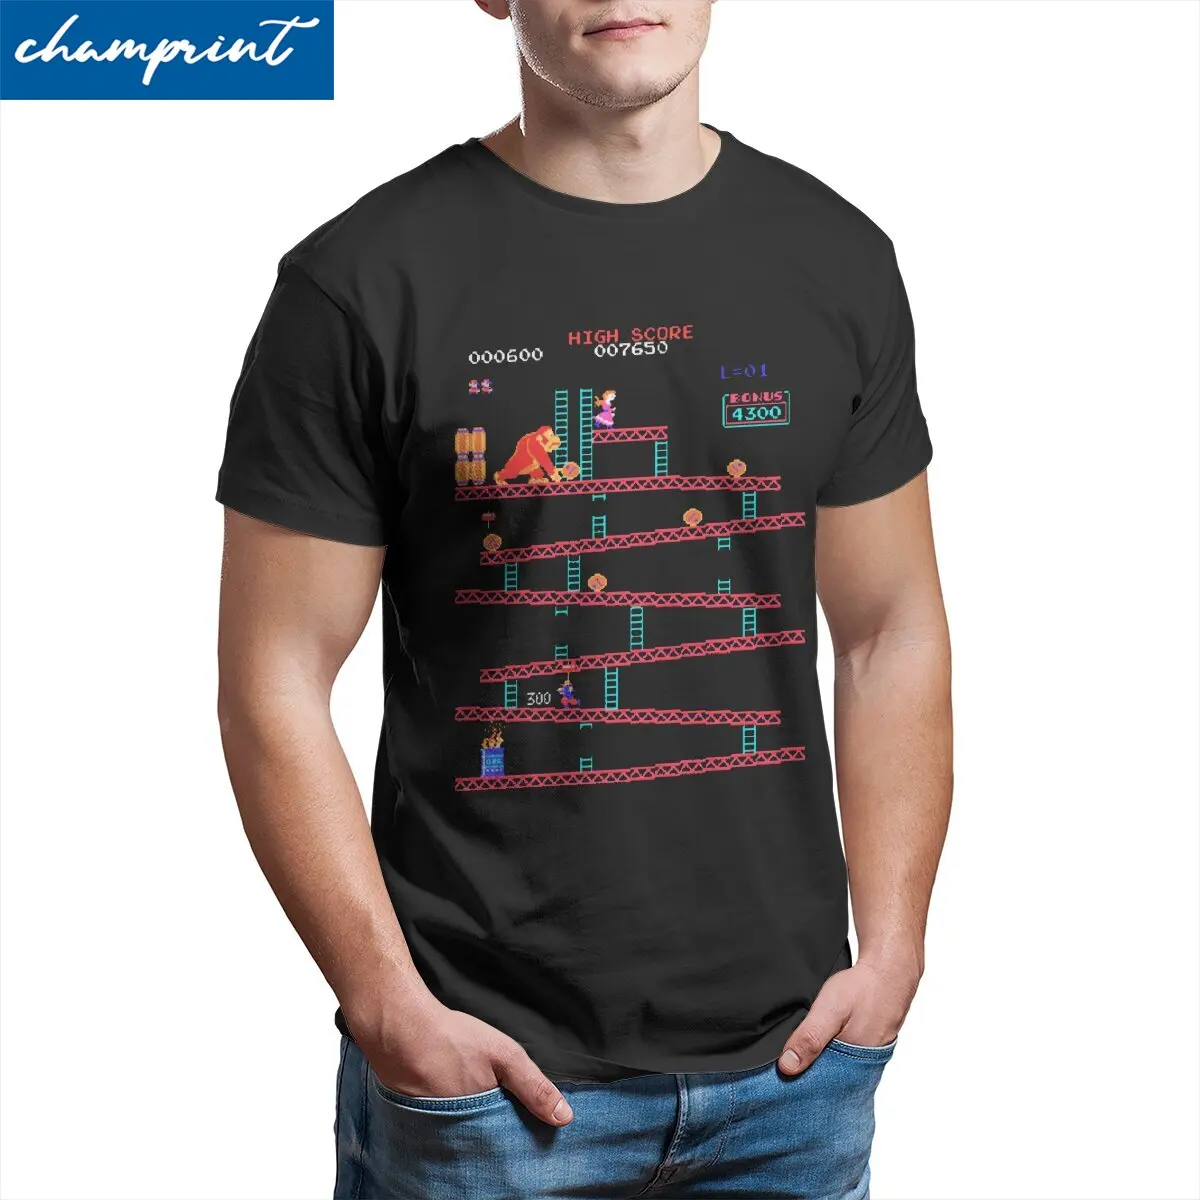 Arcade Game Donkey Kong Collage  T-Shirt for Men Vintage Retro Funny Cotton Tee Shirt Crewneck Short Sleeve T Shirt Graphic Tops